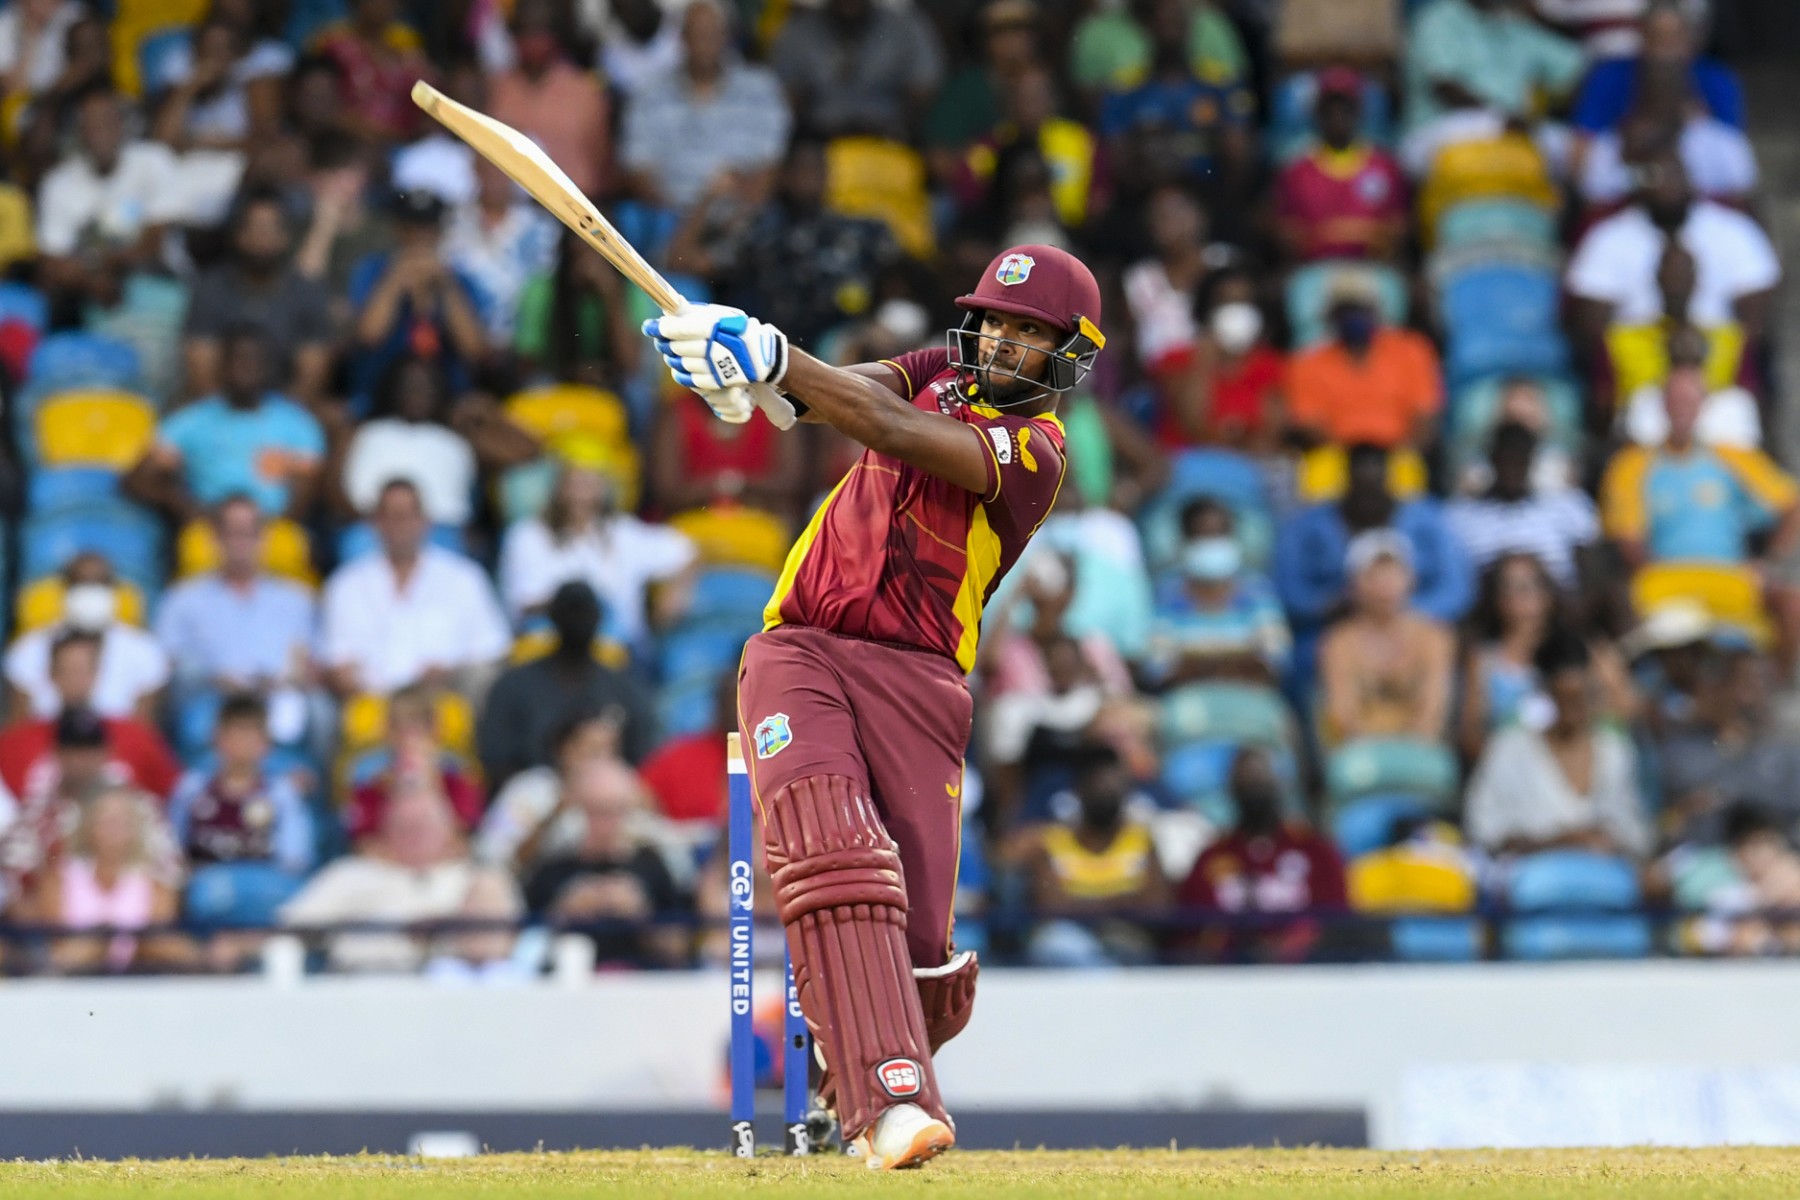 666! Pooran takes Warrican to the cleaners